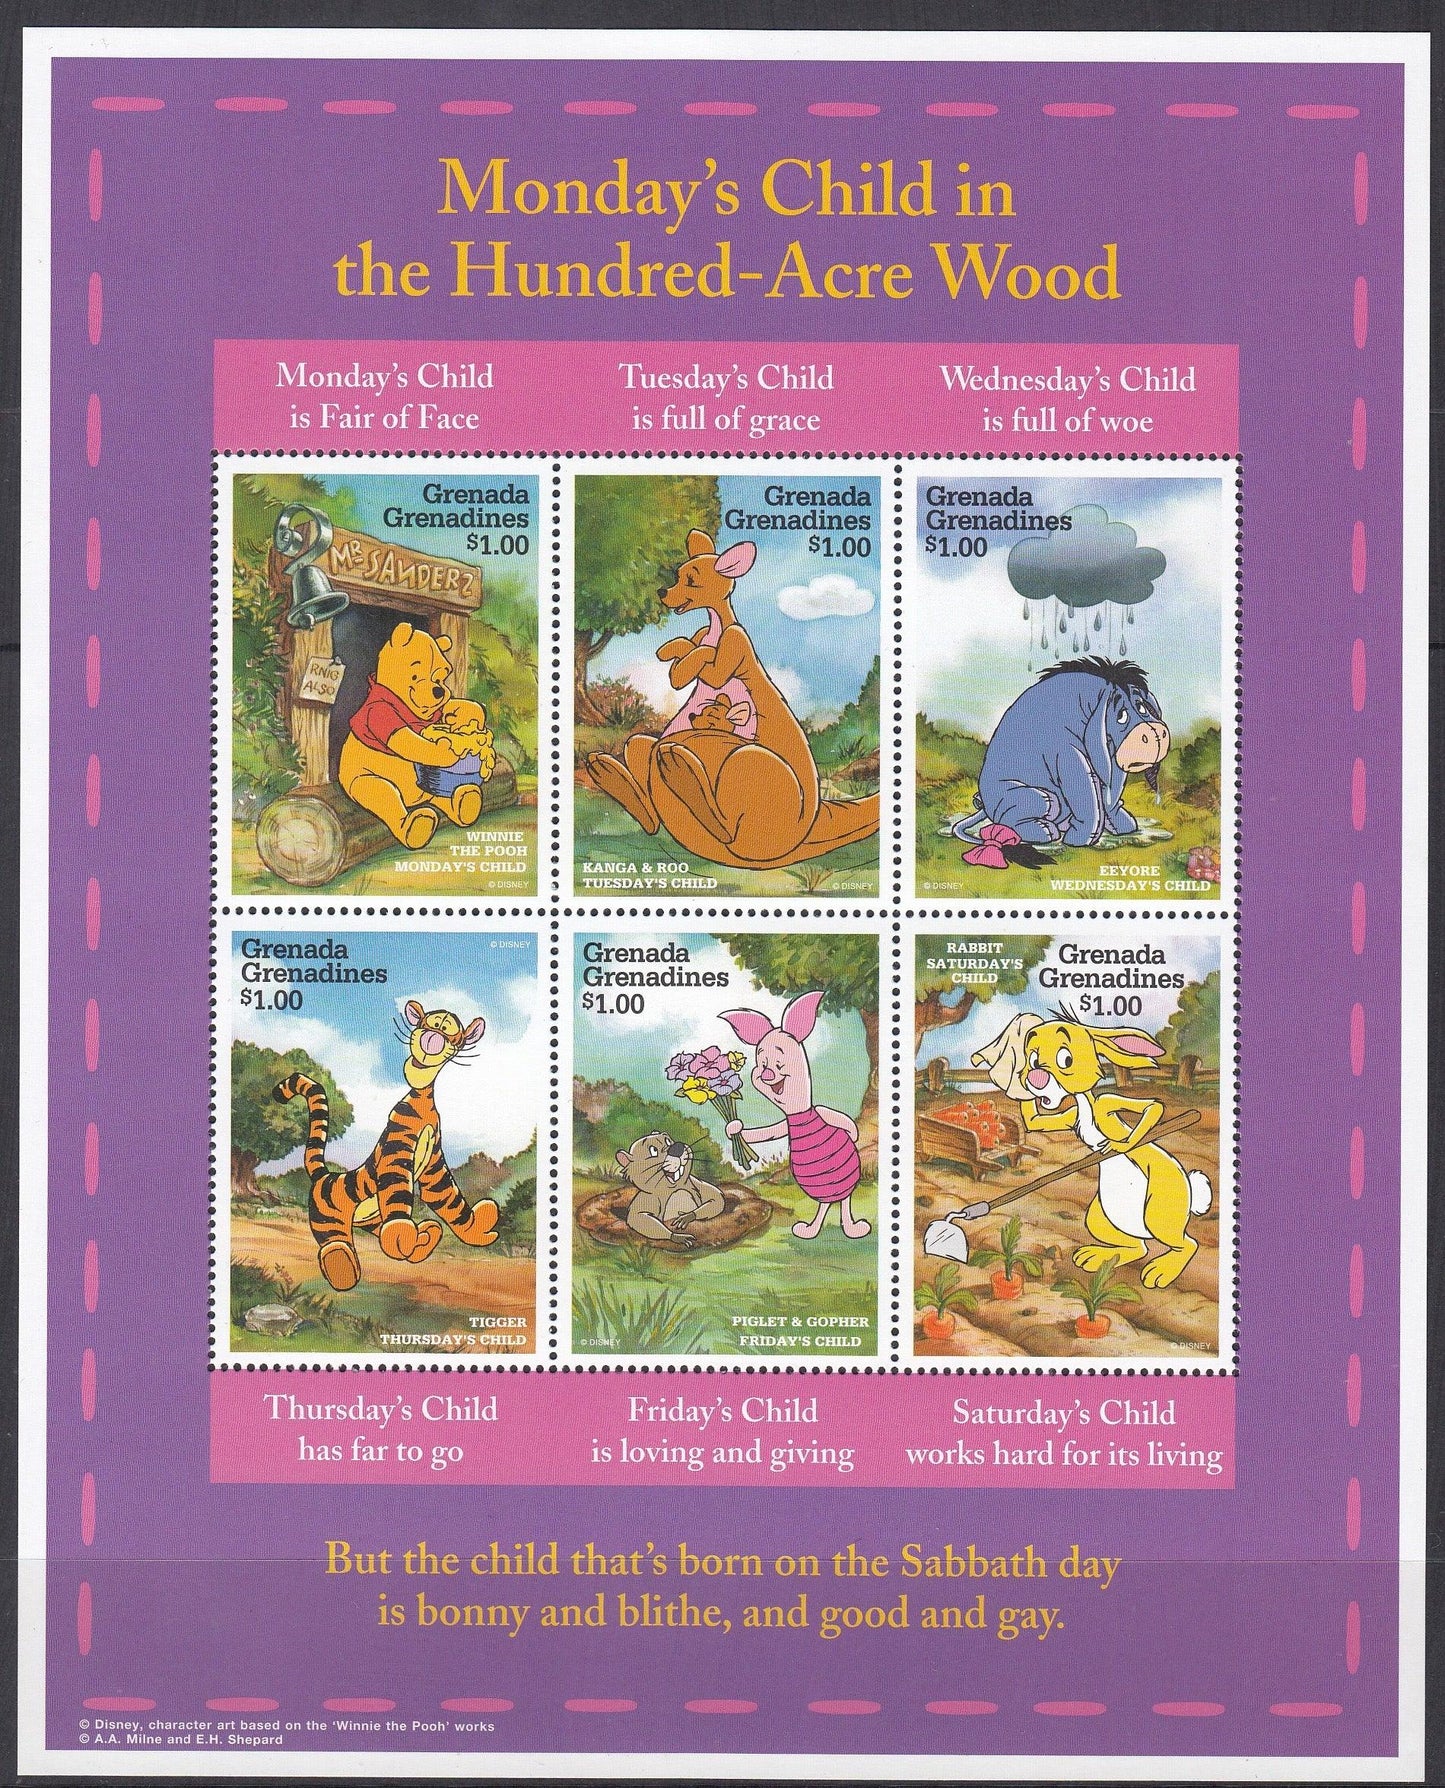 Grenada / Grenadines 1997 - $6 Monday's Child in the 100-Acre Wood Disney Miniature Sheet - Mint Unhinged - Loose Change Coins